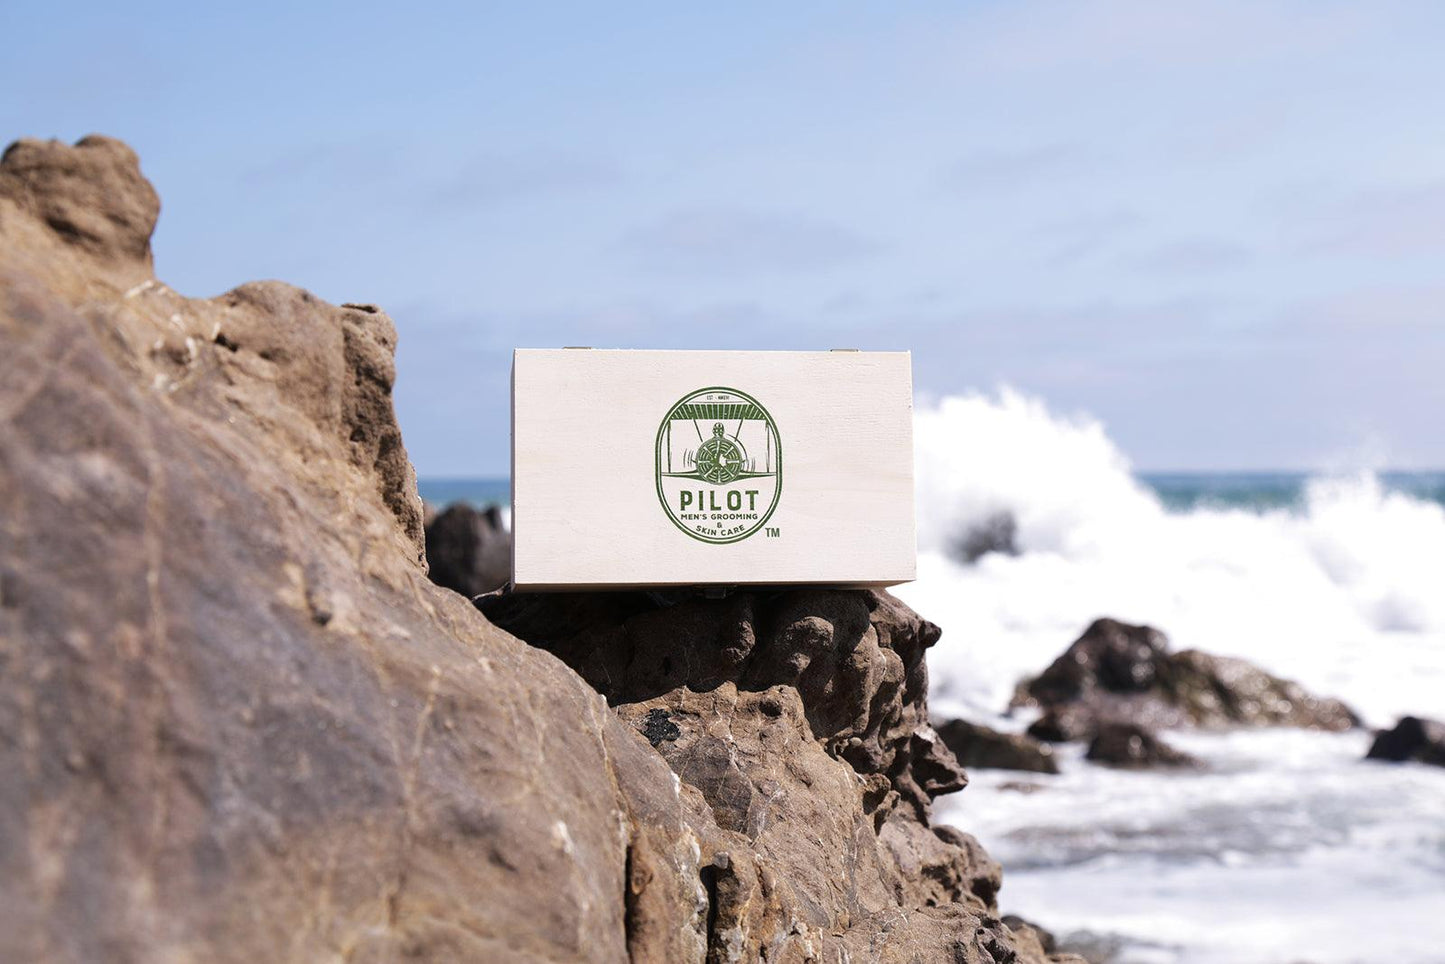 Care Box (5 photos) - Photography and Web Design - Los Angeles, US based Shopify Experts Revo Designs